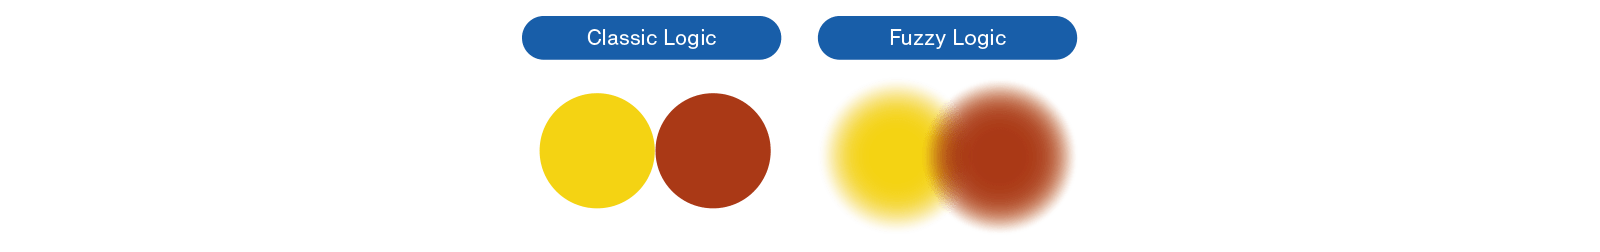 difference between classical logic and fuzzy logic en